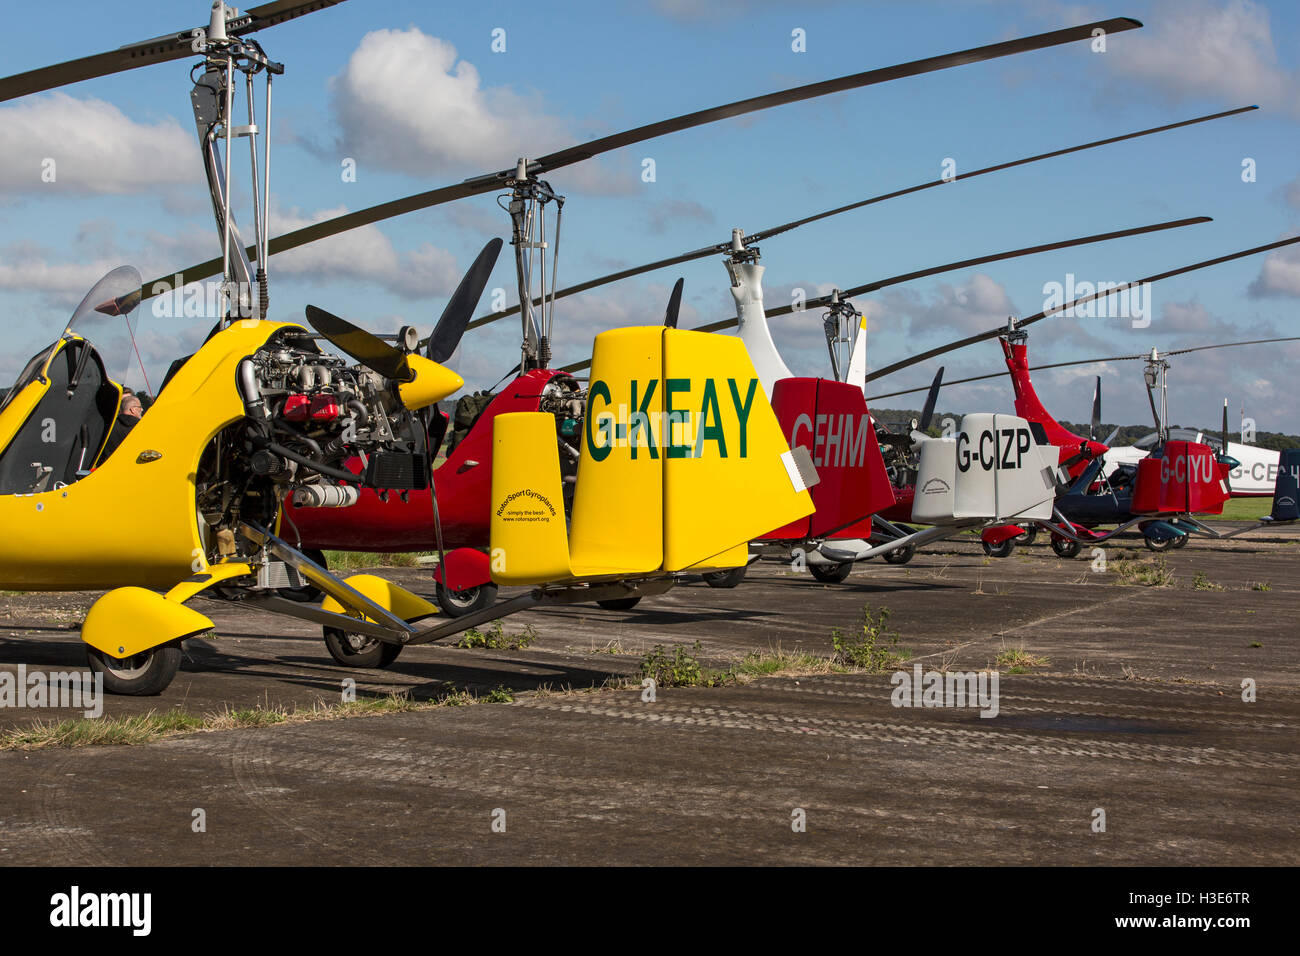 A line up of autogyro aircraft at an airport. Stock Photo